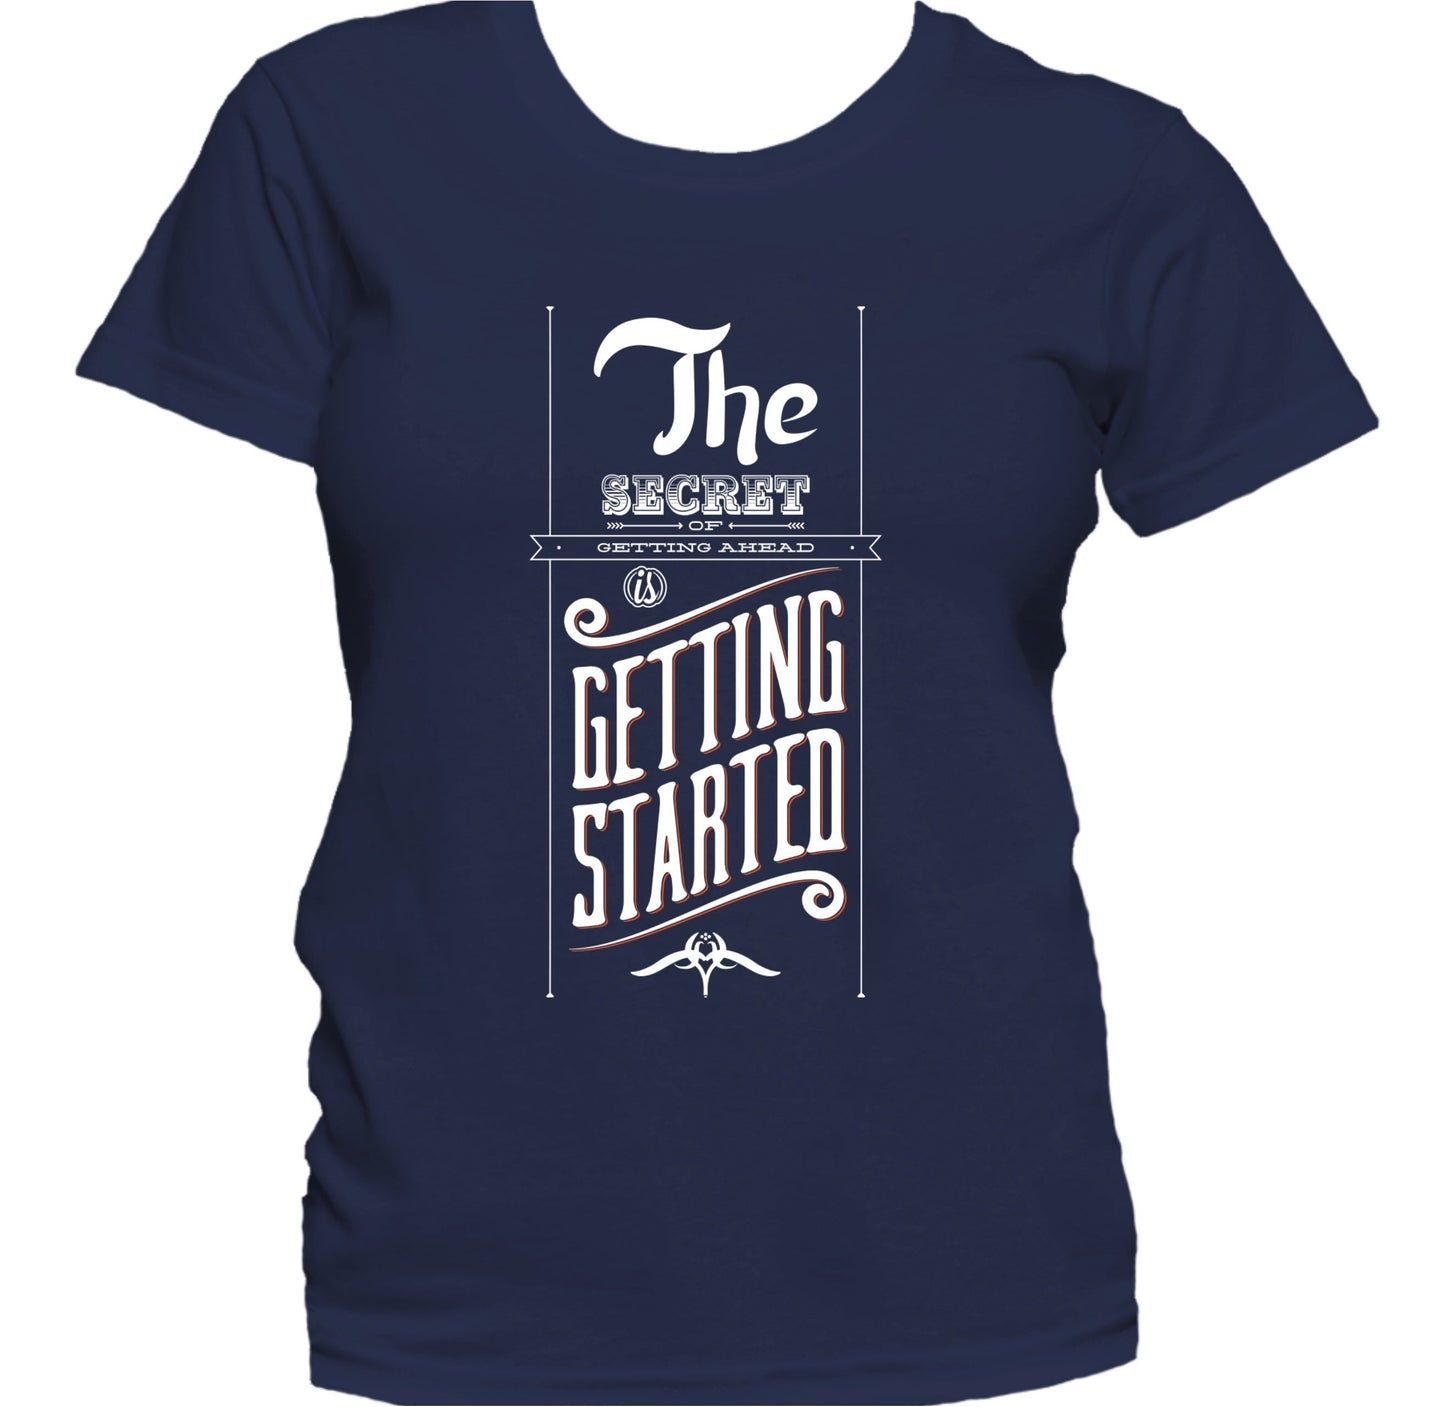 The Secret Of Getting Ahead Is Getting Started Women's T-Shirt